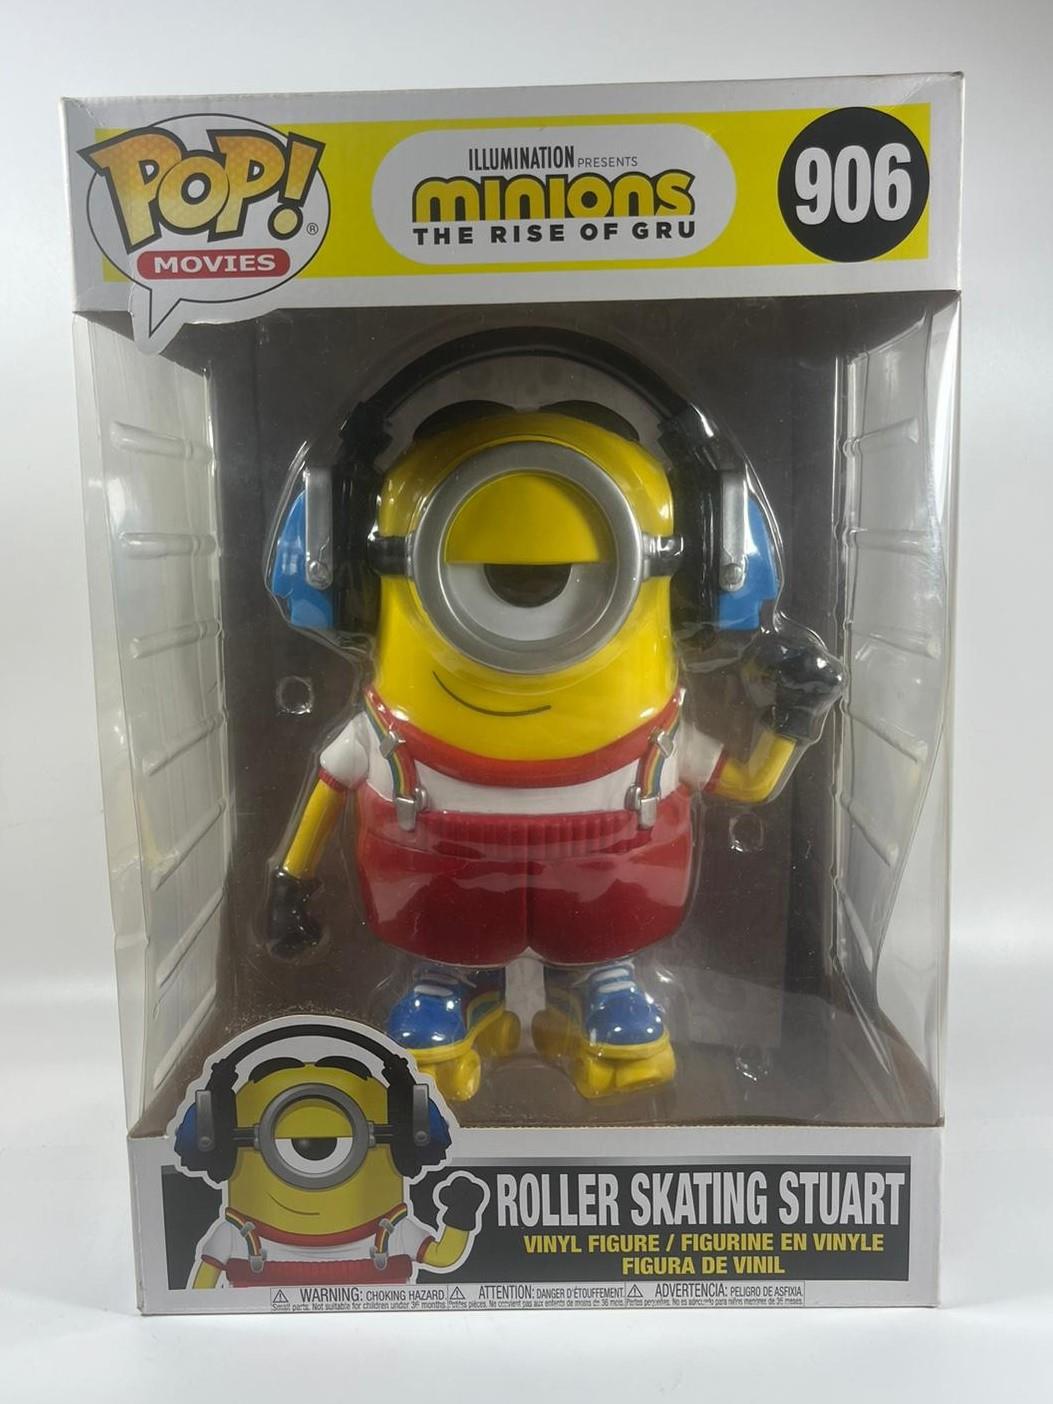 A LARGE FUNKO POP MOVIES 10" 906 MINIONS THE RISE OF GRU ROLLER SKATING STUART VINYL BOXED FIGURE